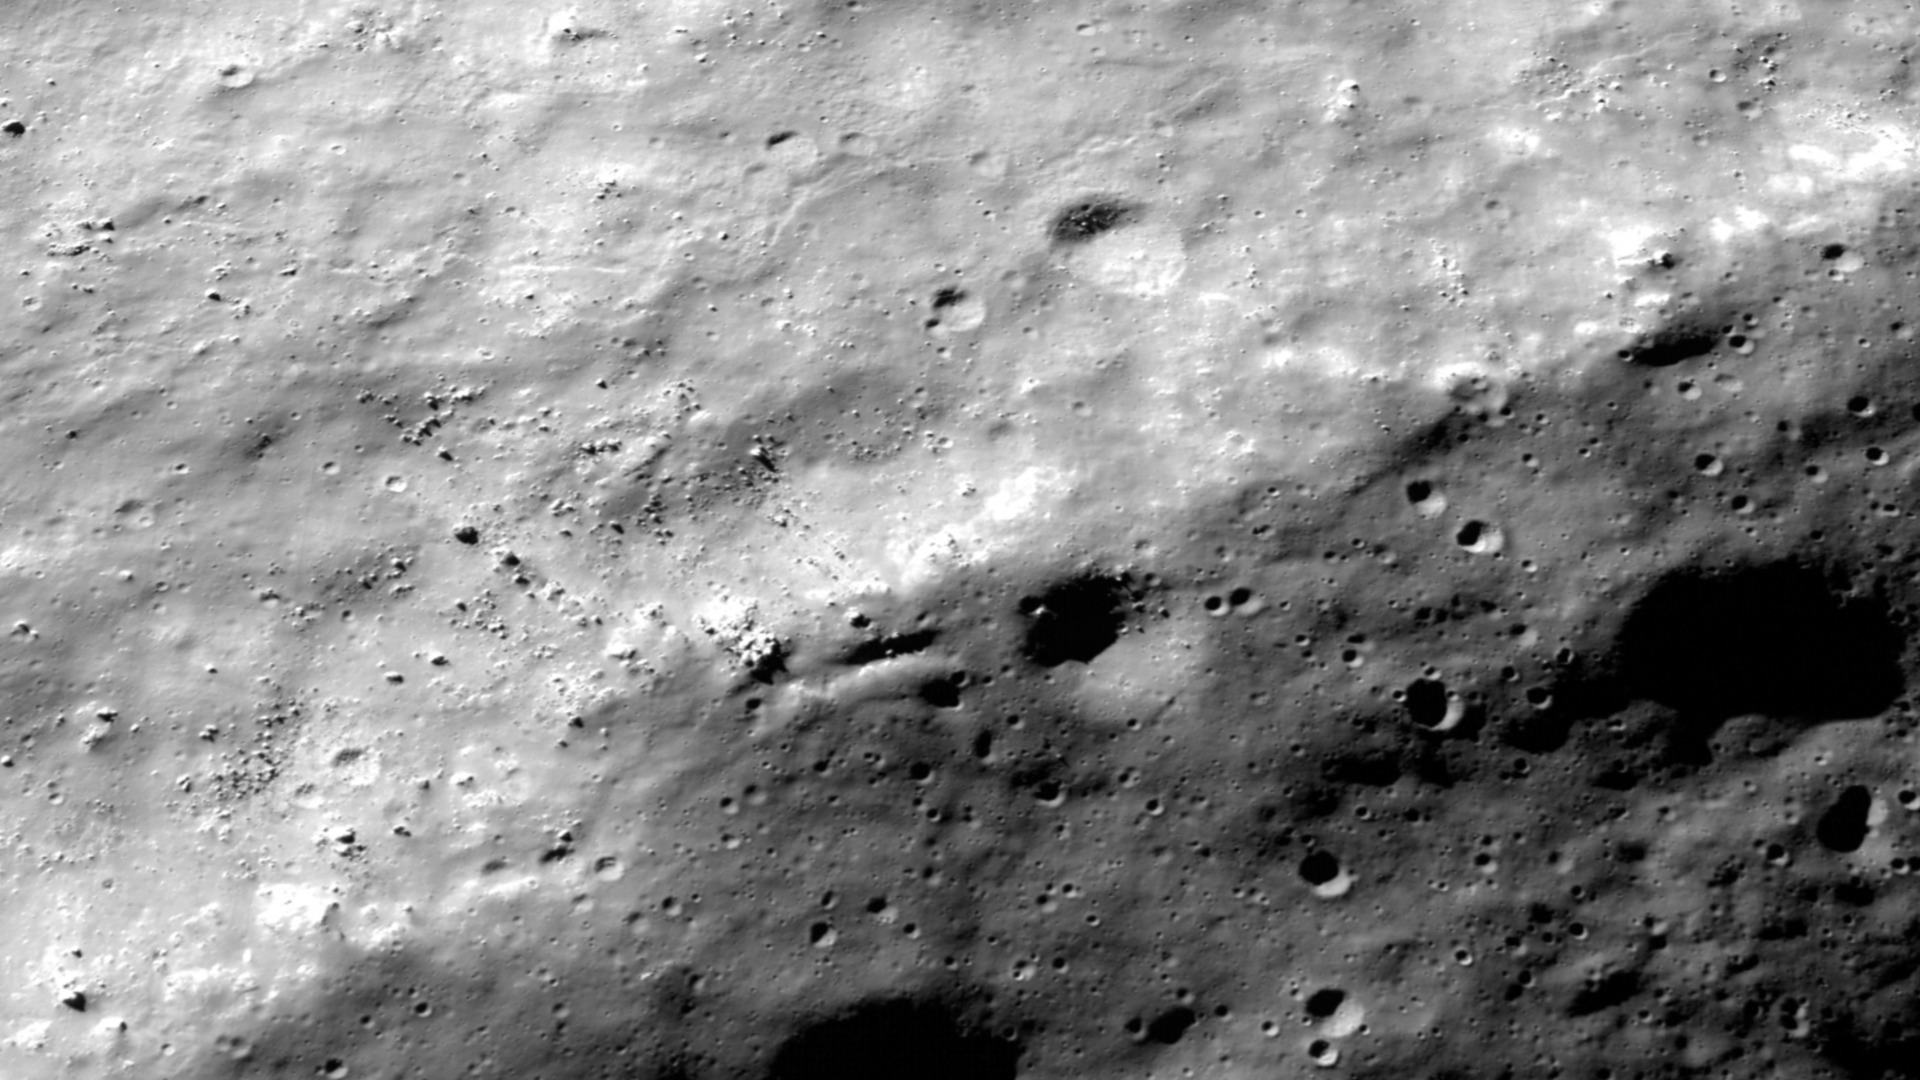 This animation zooms into the LRO/LROC NAC swath of Shackleton crater's rim and slowly pans across the rim's surface.